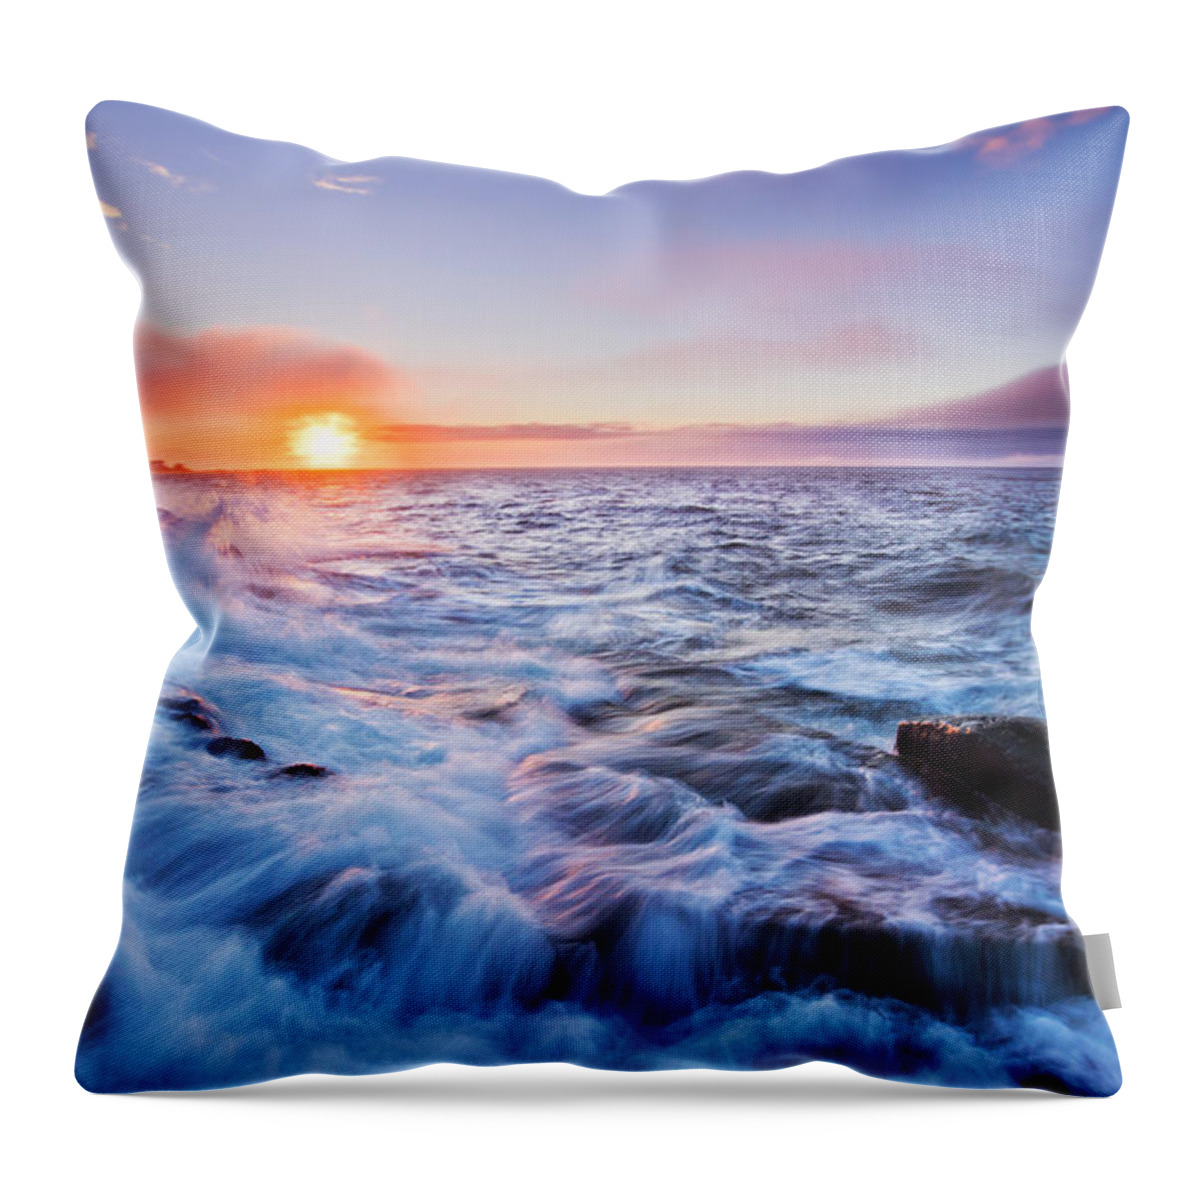 Atlantic Throw Pillow featuring the photograph Rising Tide by Mircea Costina Photography